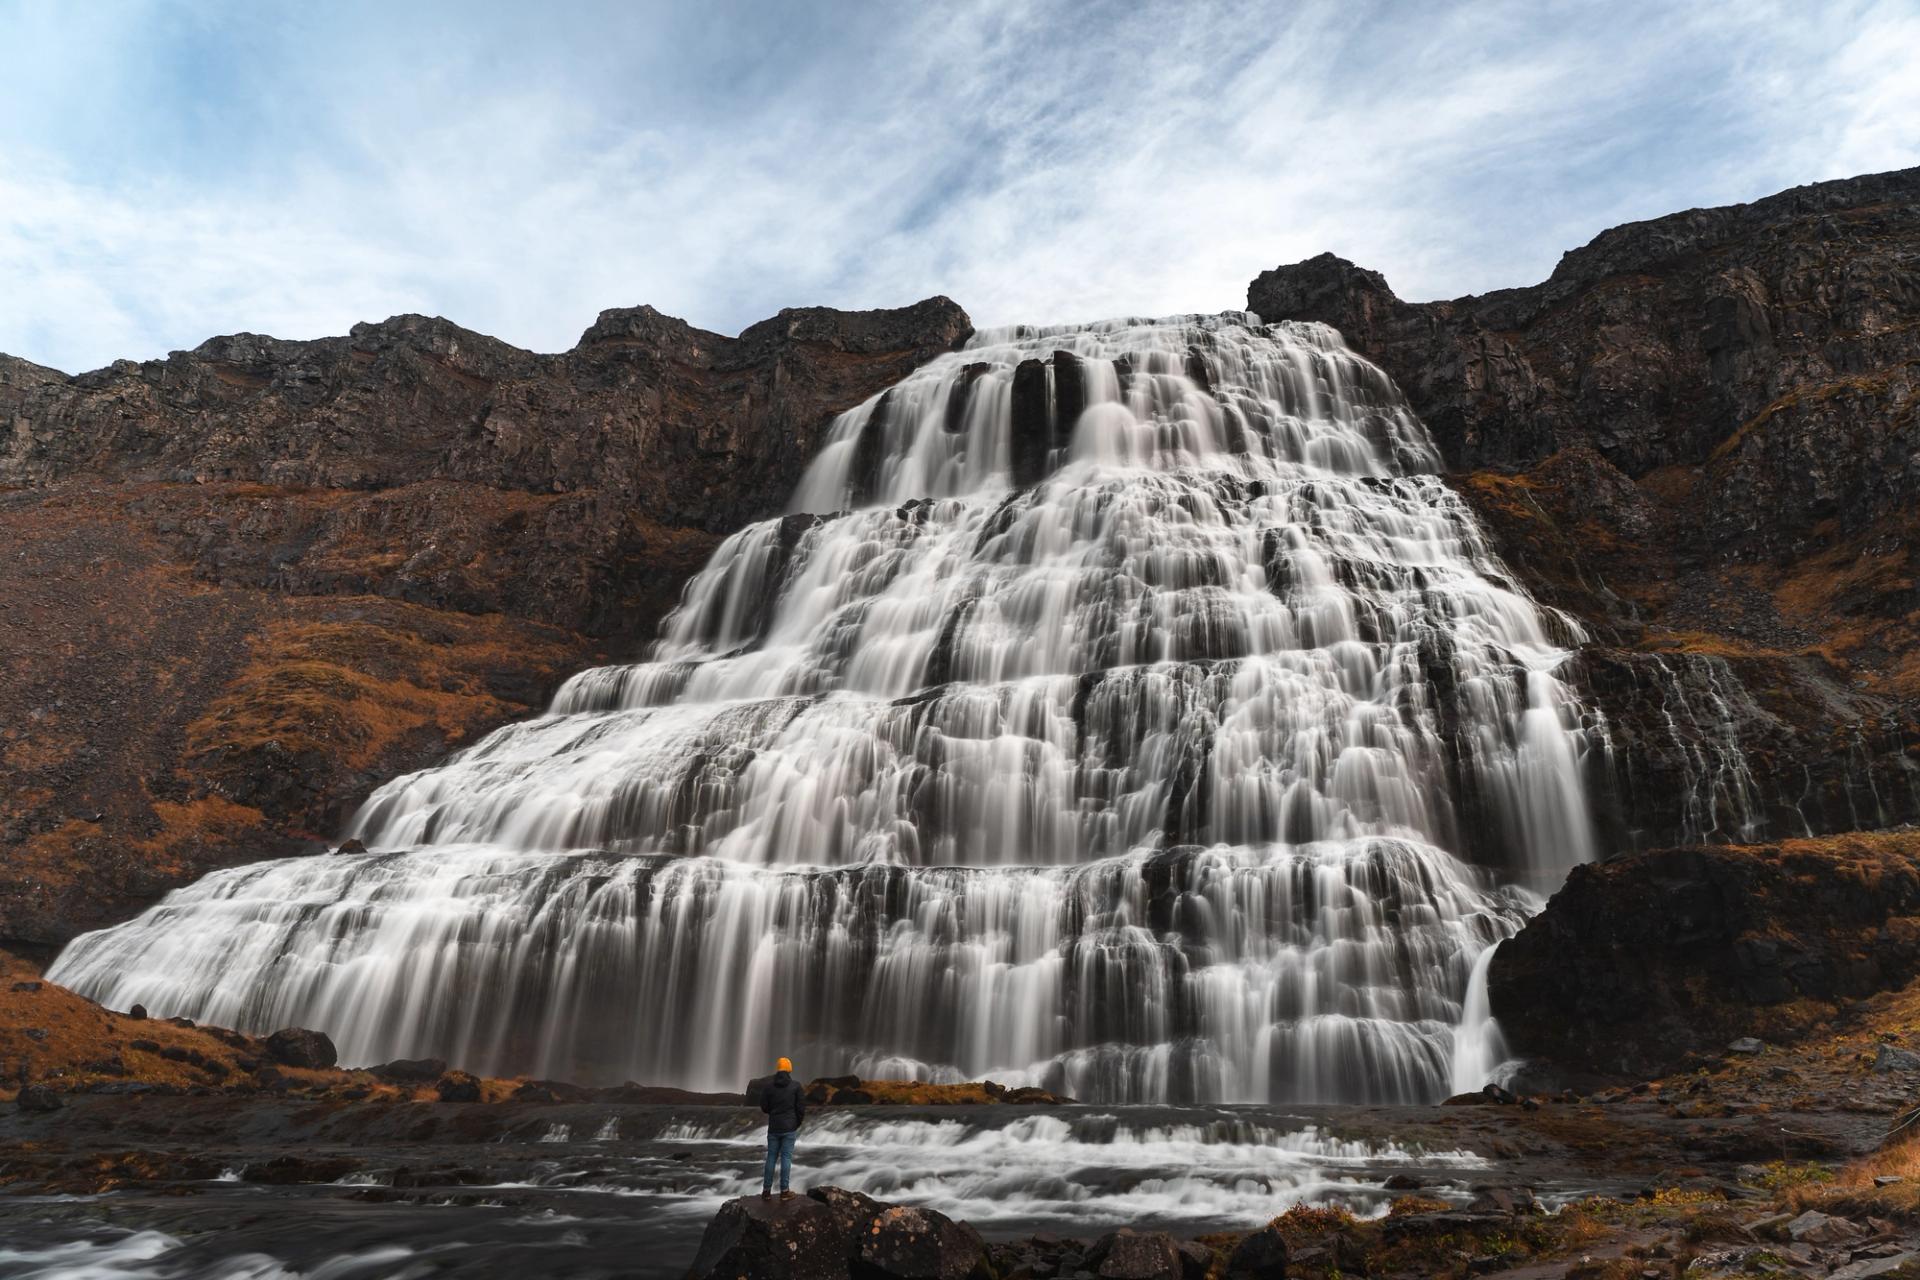 A person impressed by the huge Dynjandi waterfall in Iceland